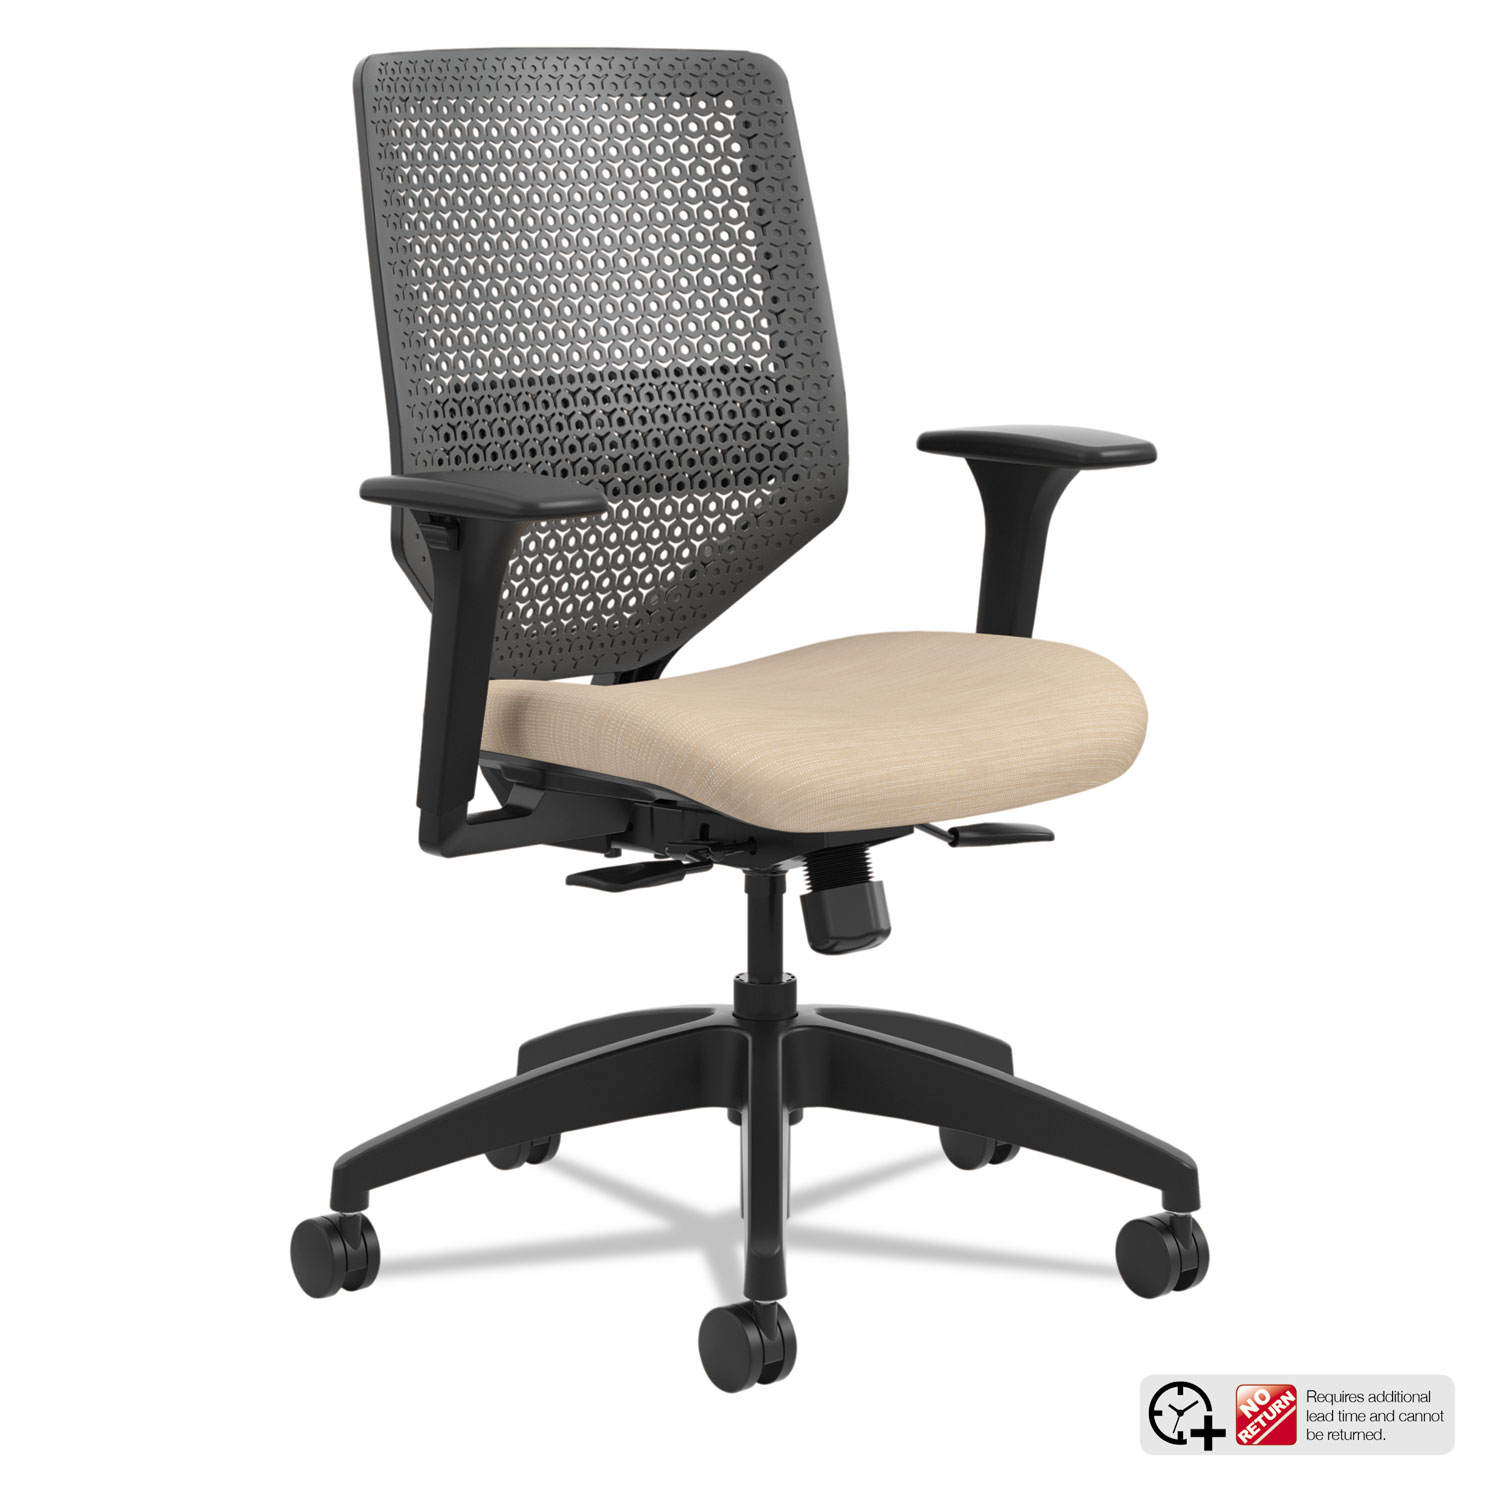  HON SVR1ACLC22TK Solve Series ReActiv Back Task Chair, Supports up to 300 lbs., Putty Seat/Charcoal Back, Black Base (HONSVR1ACLC22TK) 